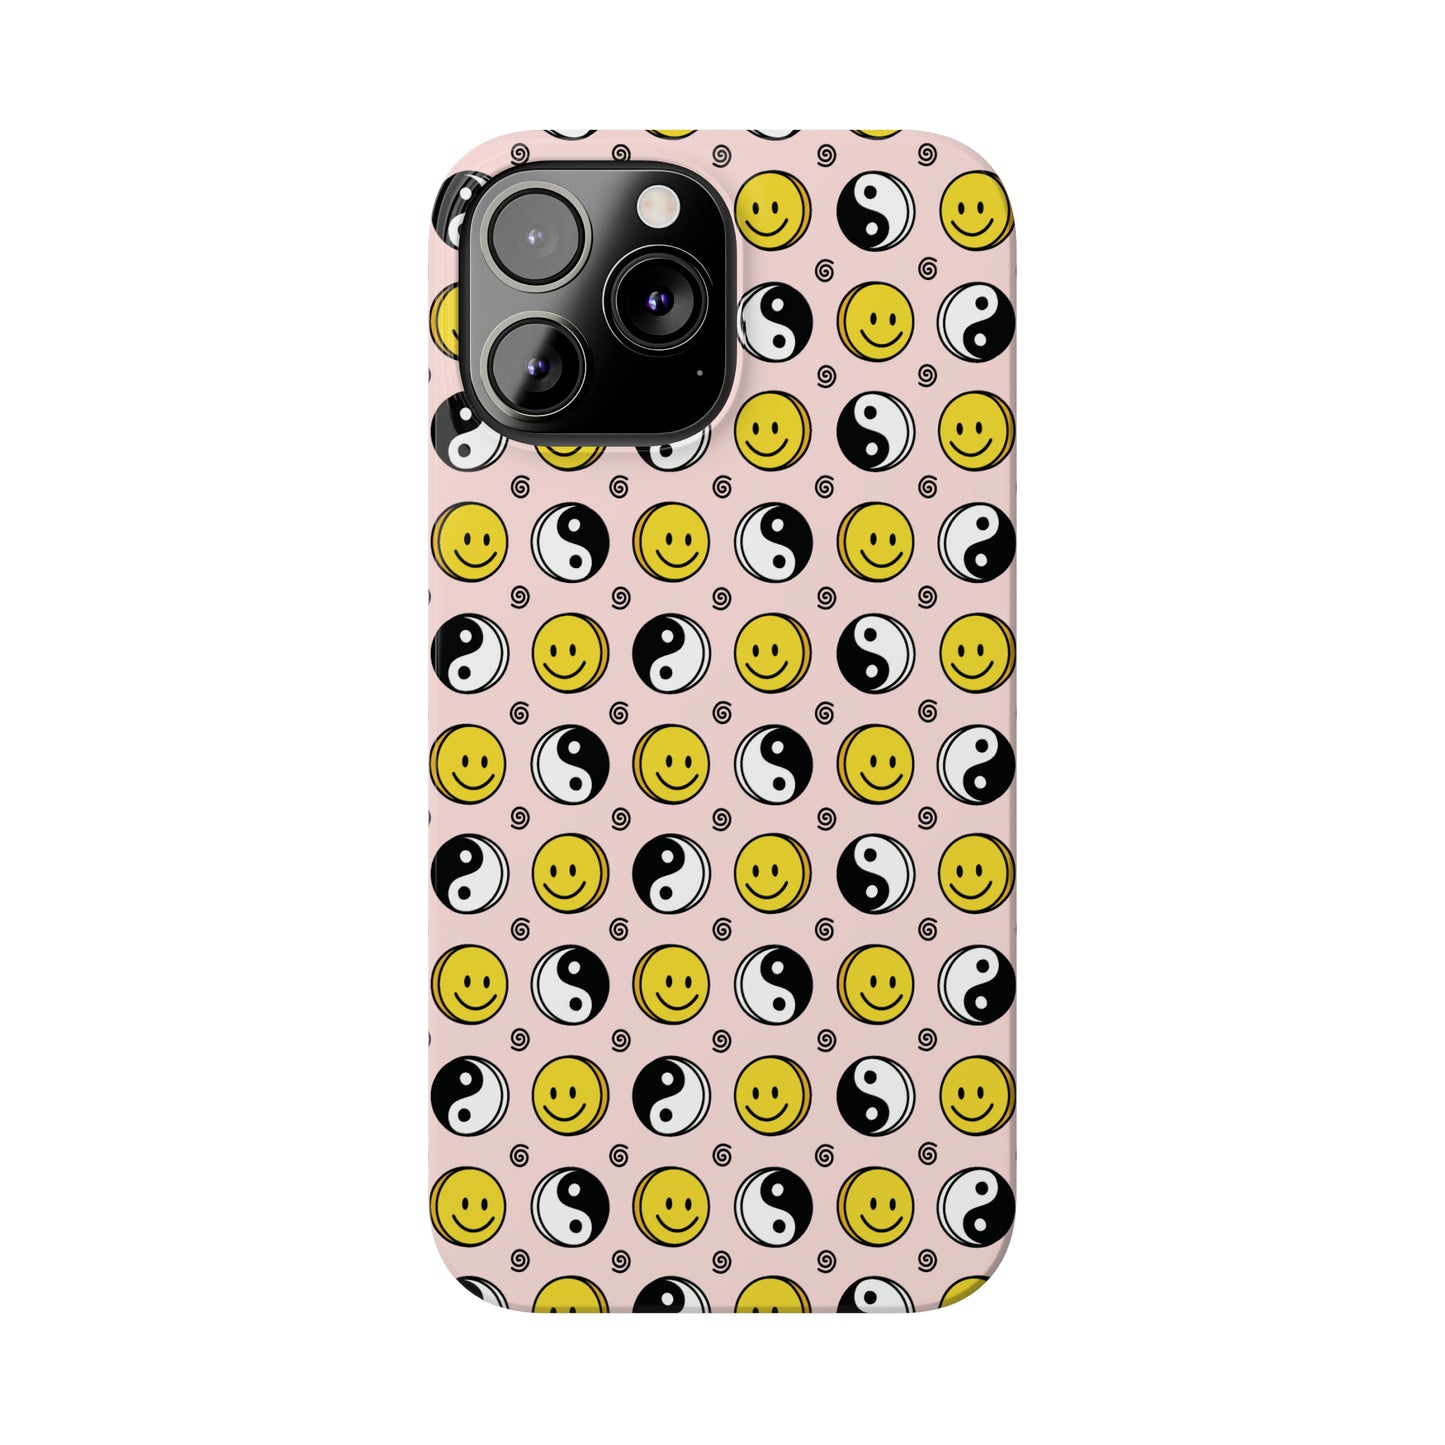 Yin and yang X Smiley Snap Case